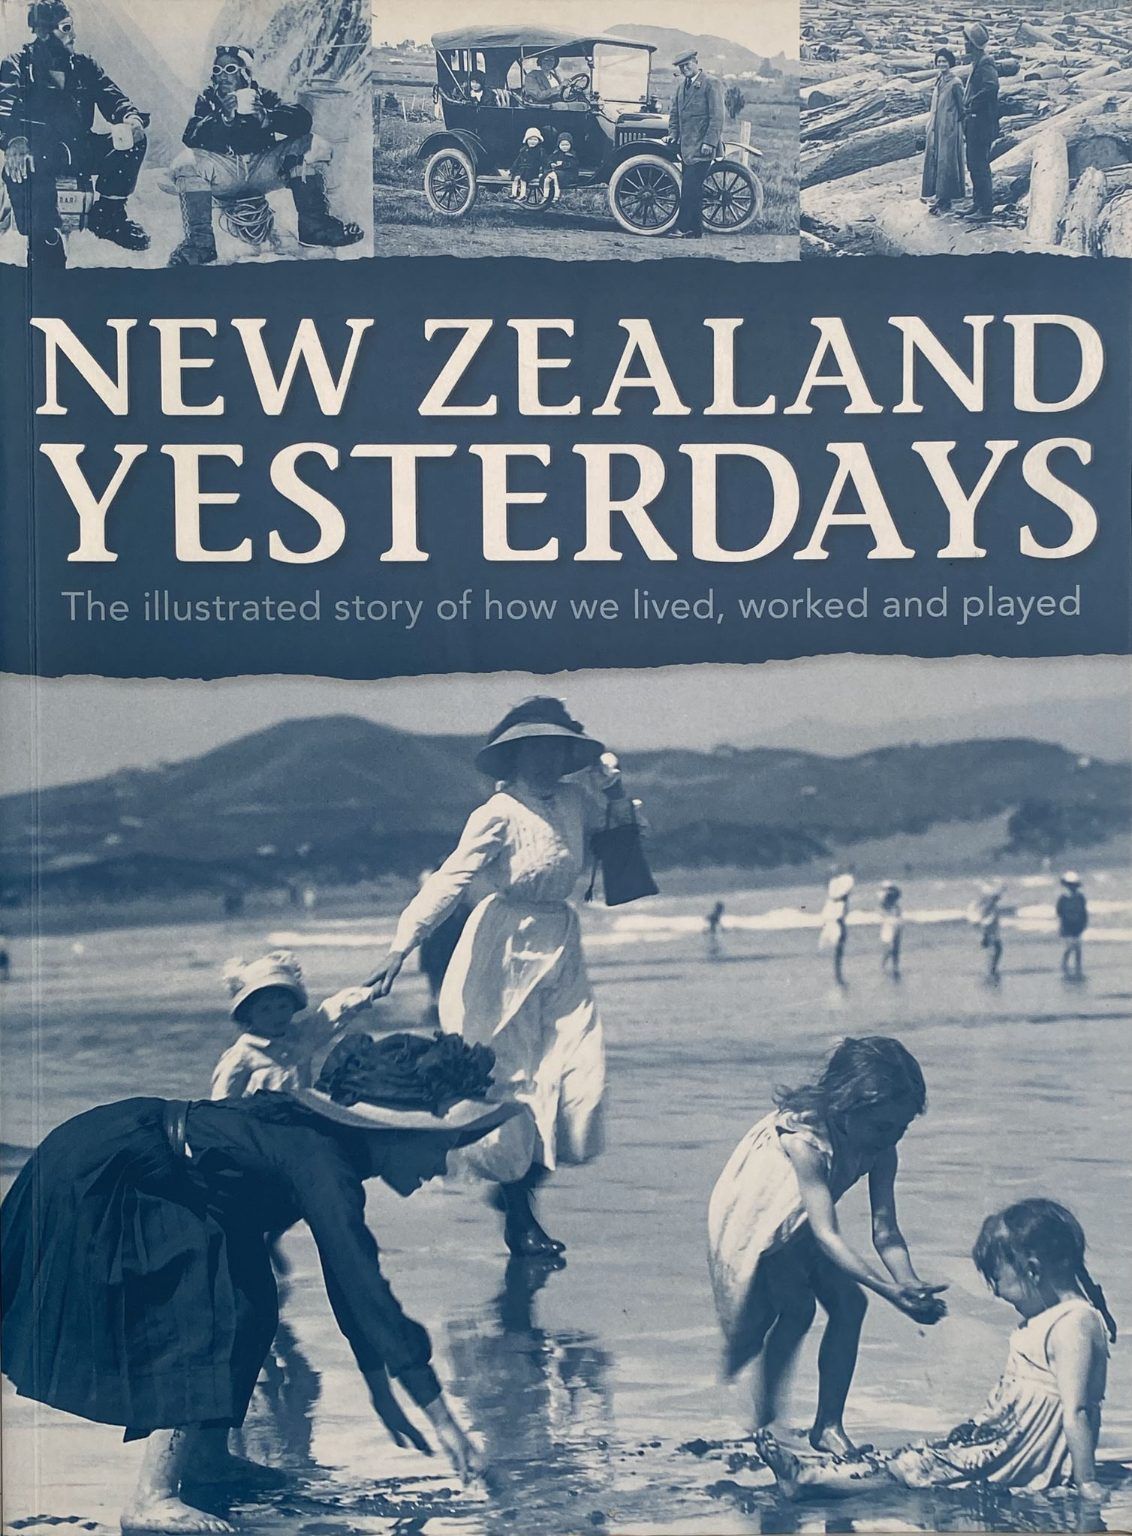 NEW ZEALAND YESTERDAYS: The illustrated story of how we live worked and played